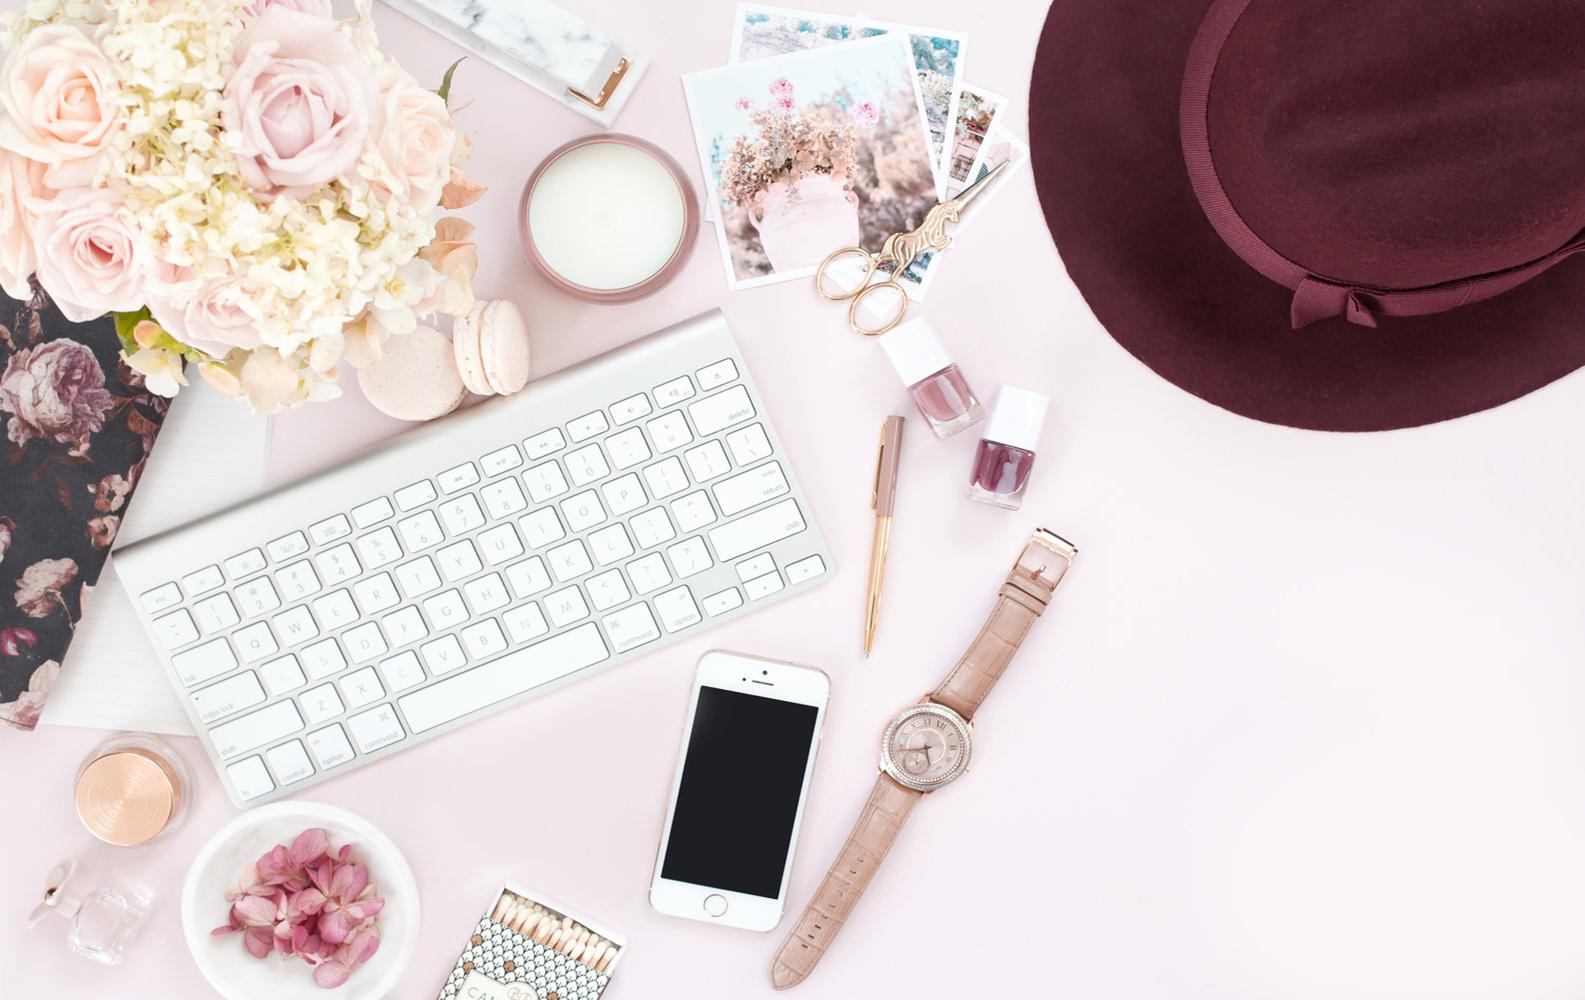 For most bloggers, success means converting loyal followers. Check out our list of seven tips to help you succeed as a blogger.